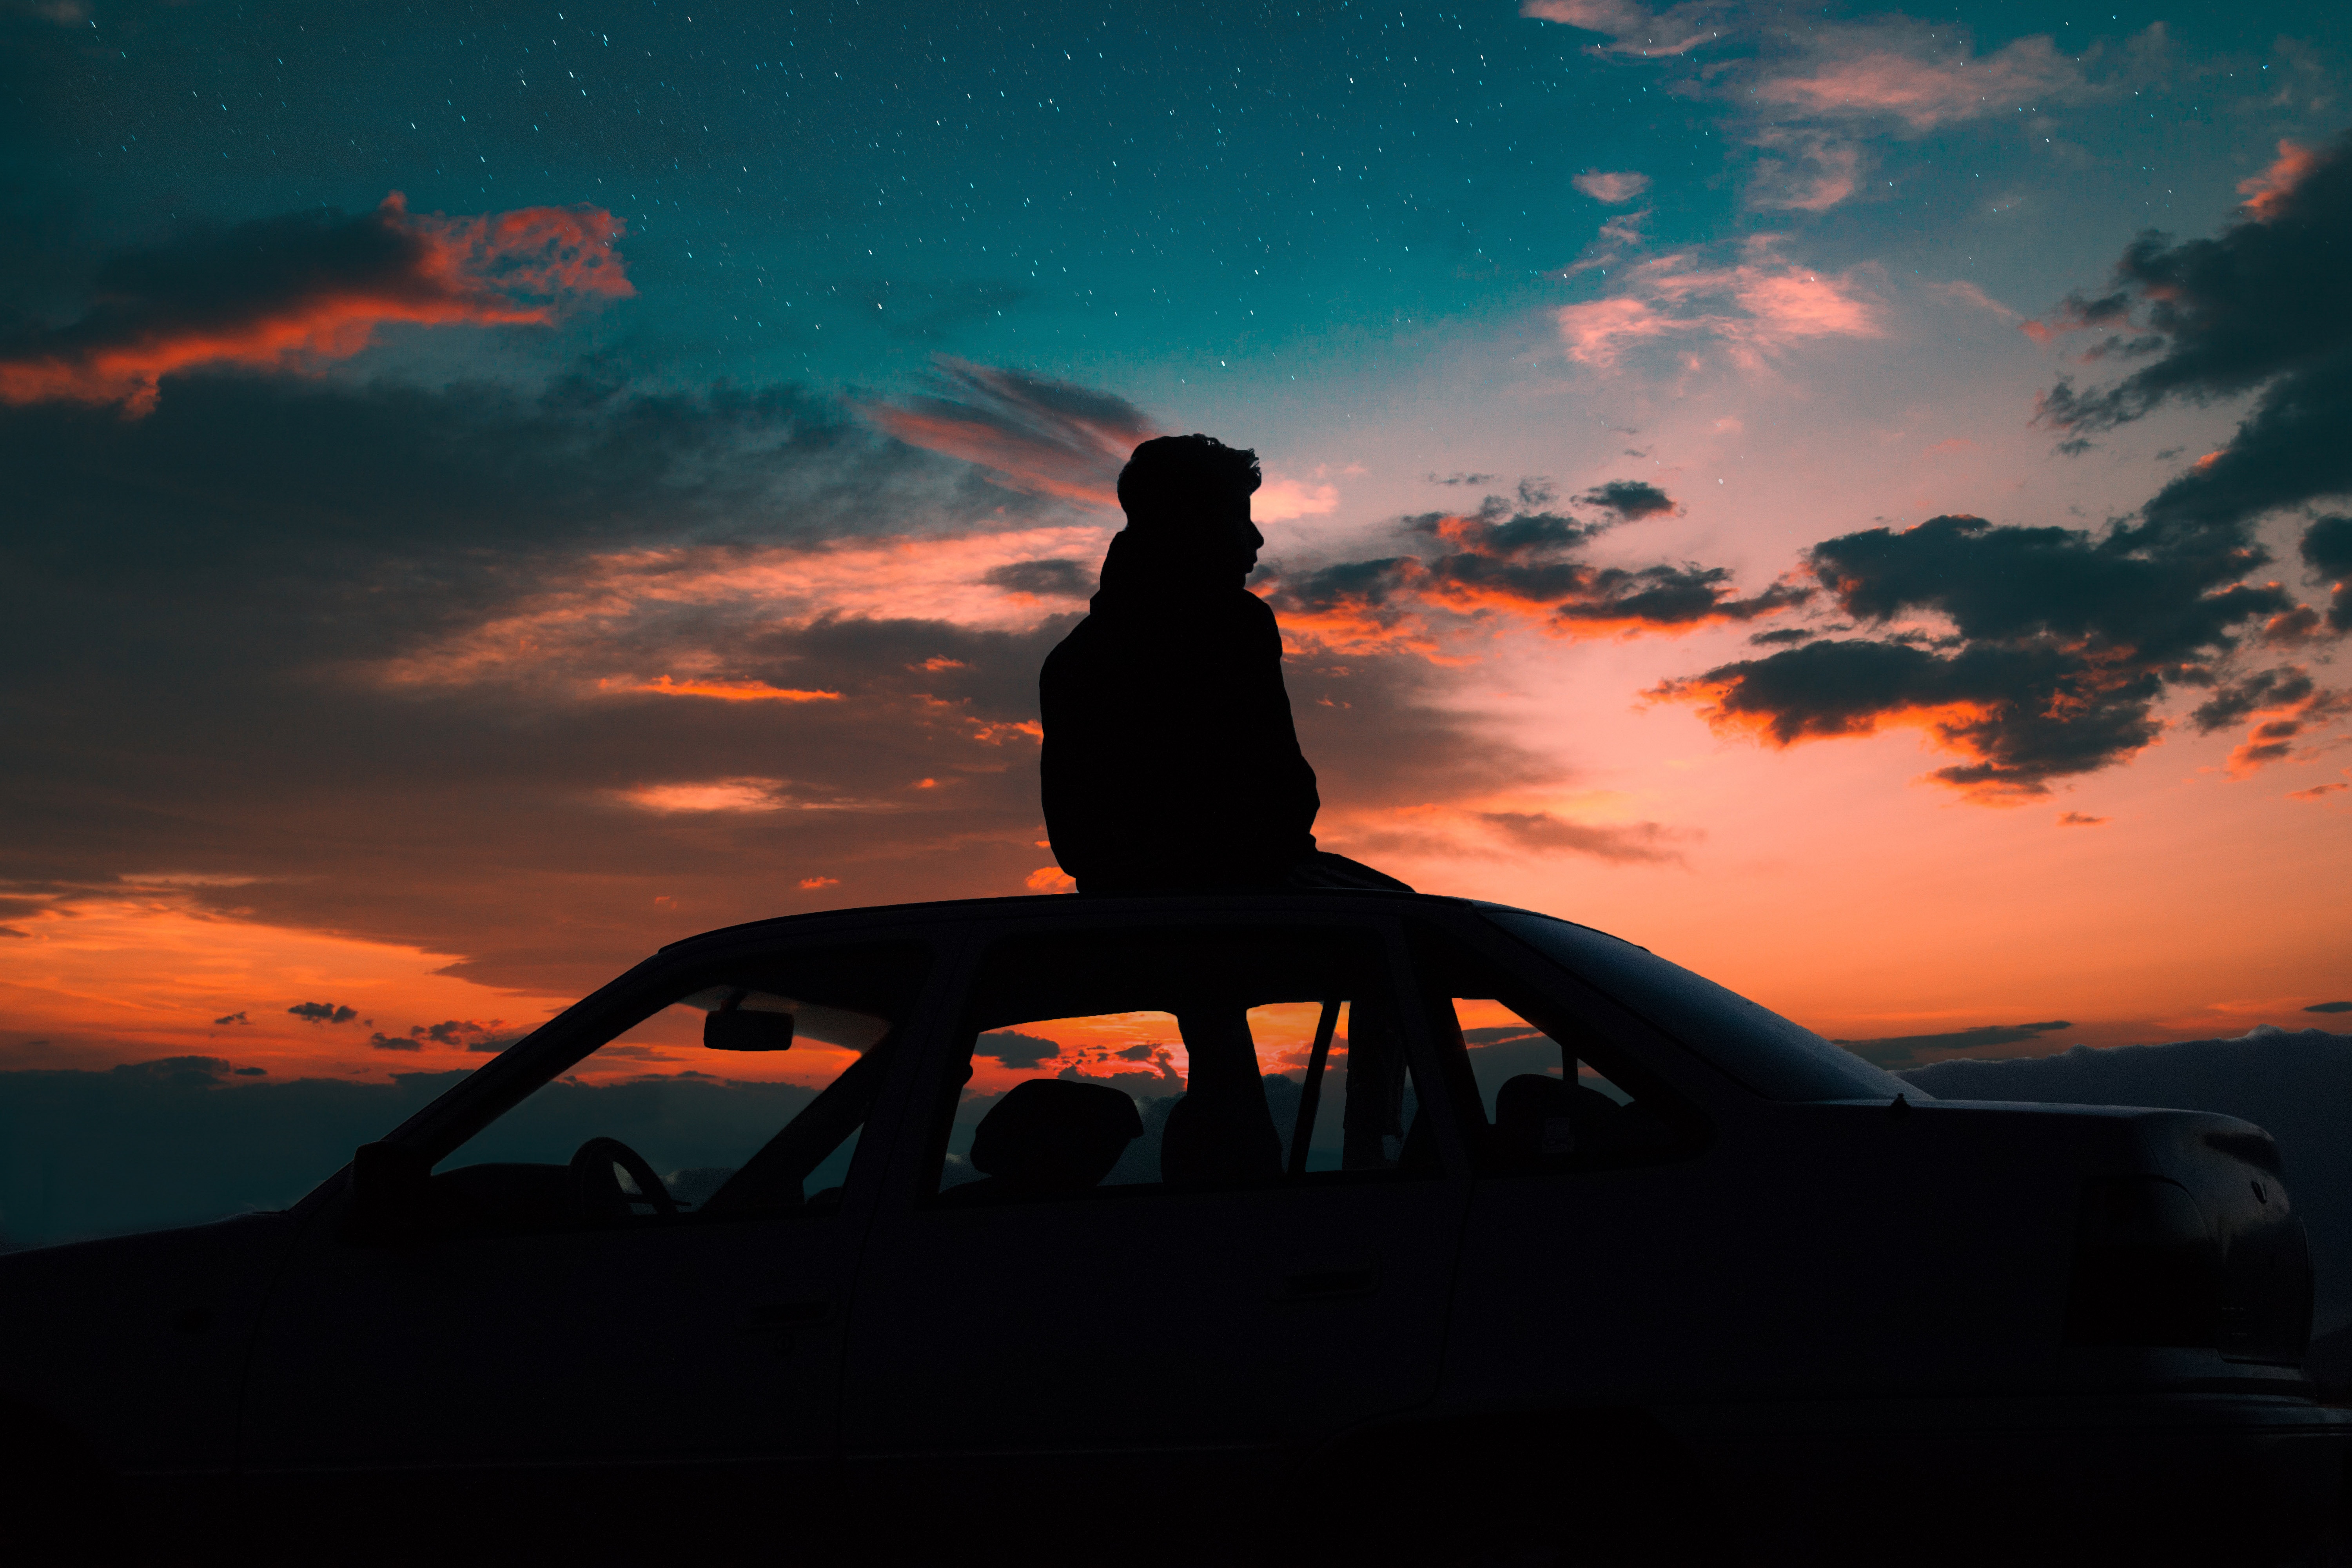 loneliness, person, dark, human, privacy, seclusion, car, starry sky